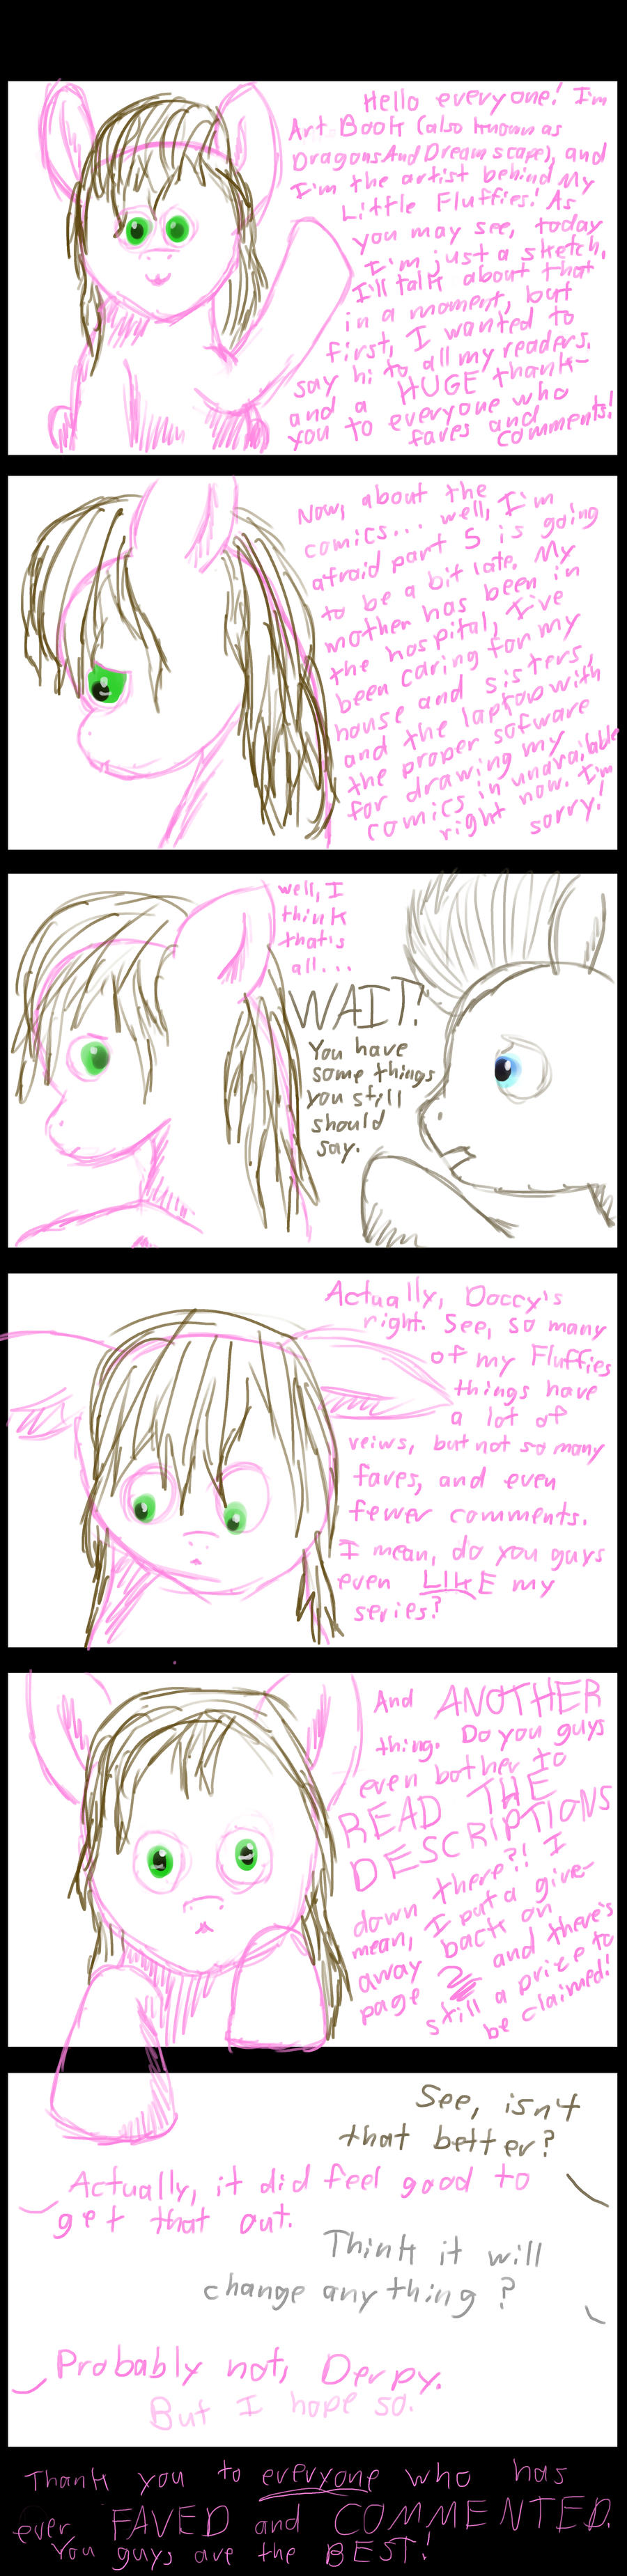 Fluffies 4 and 1/2~Message from the Artist